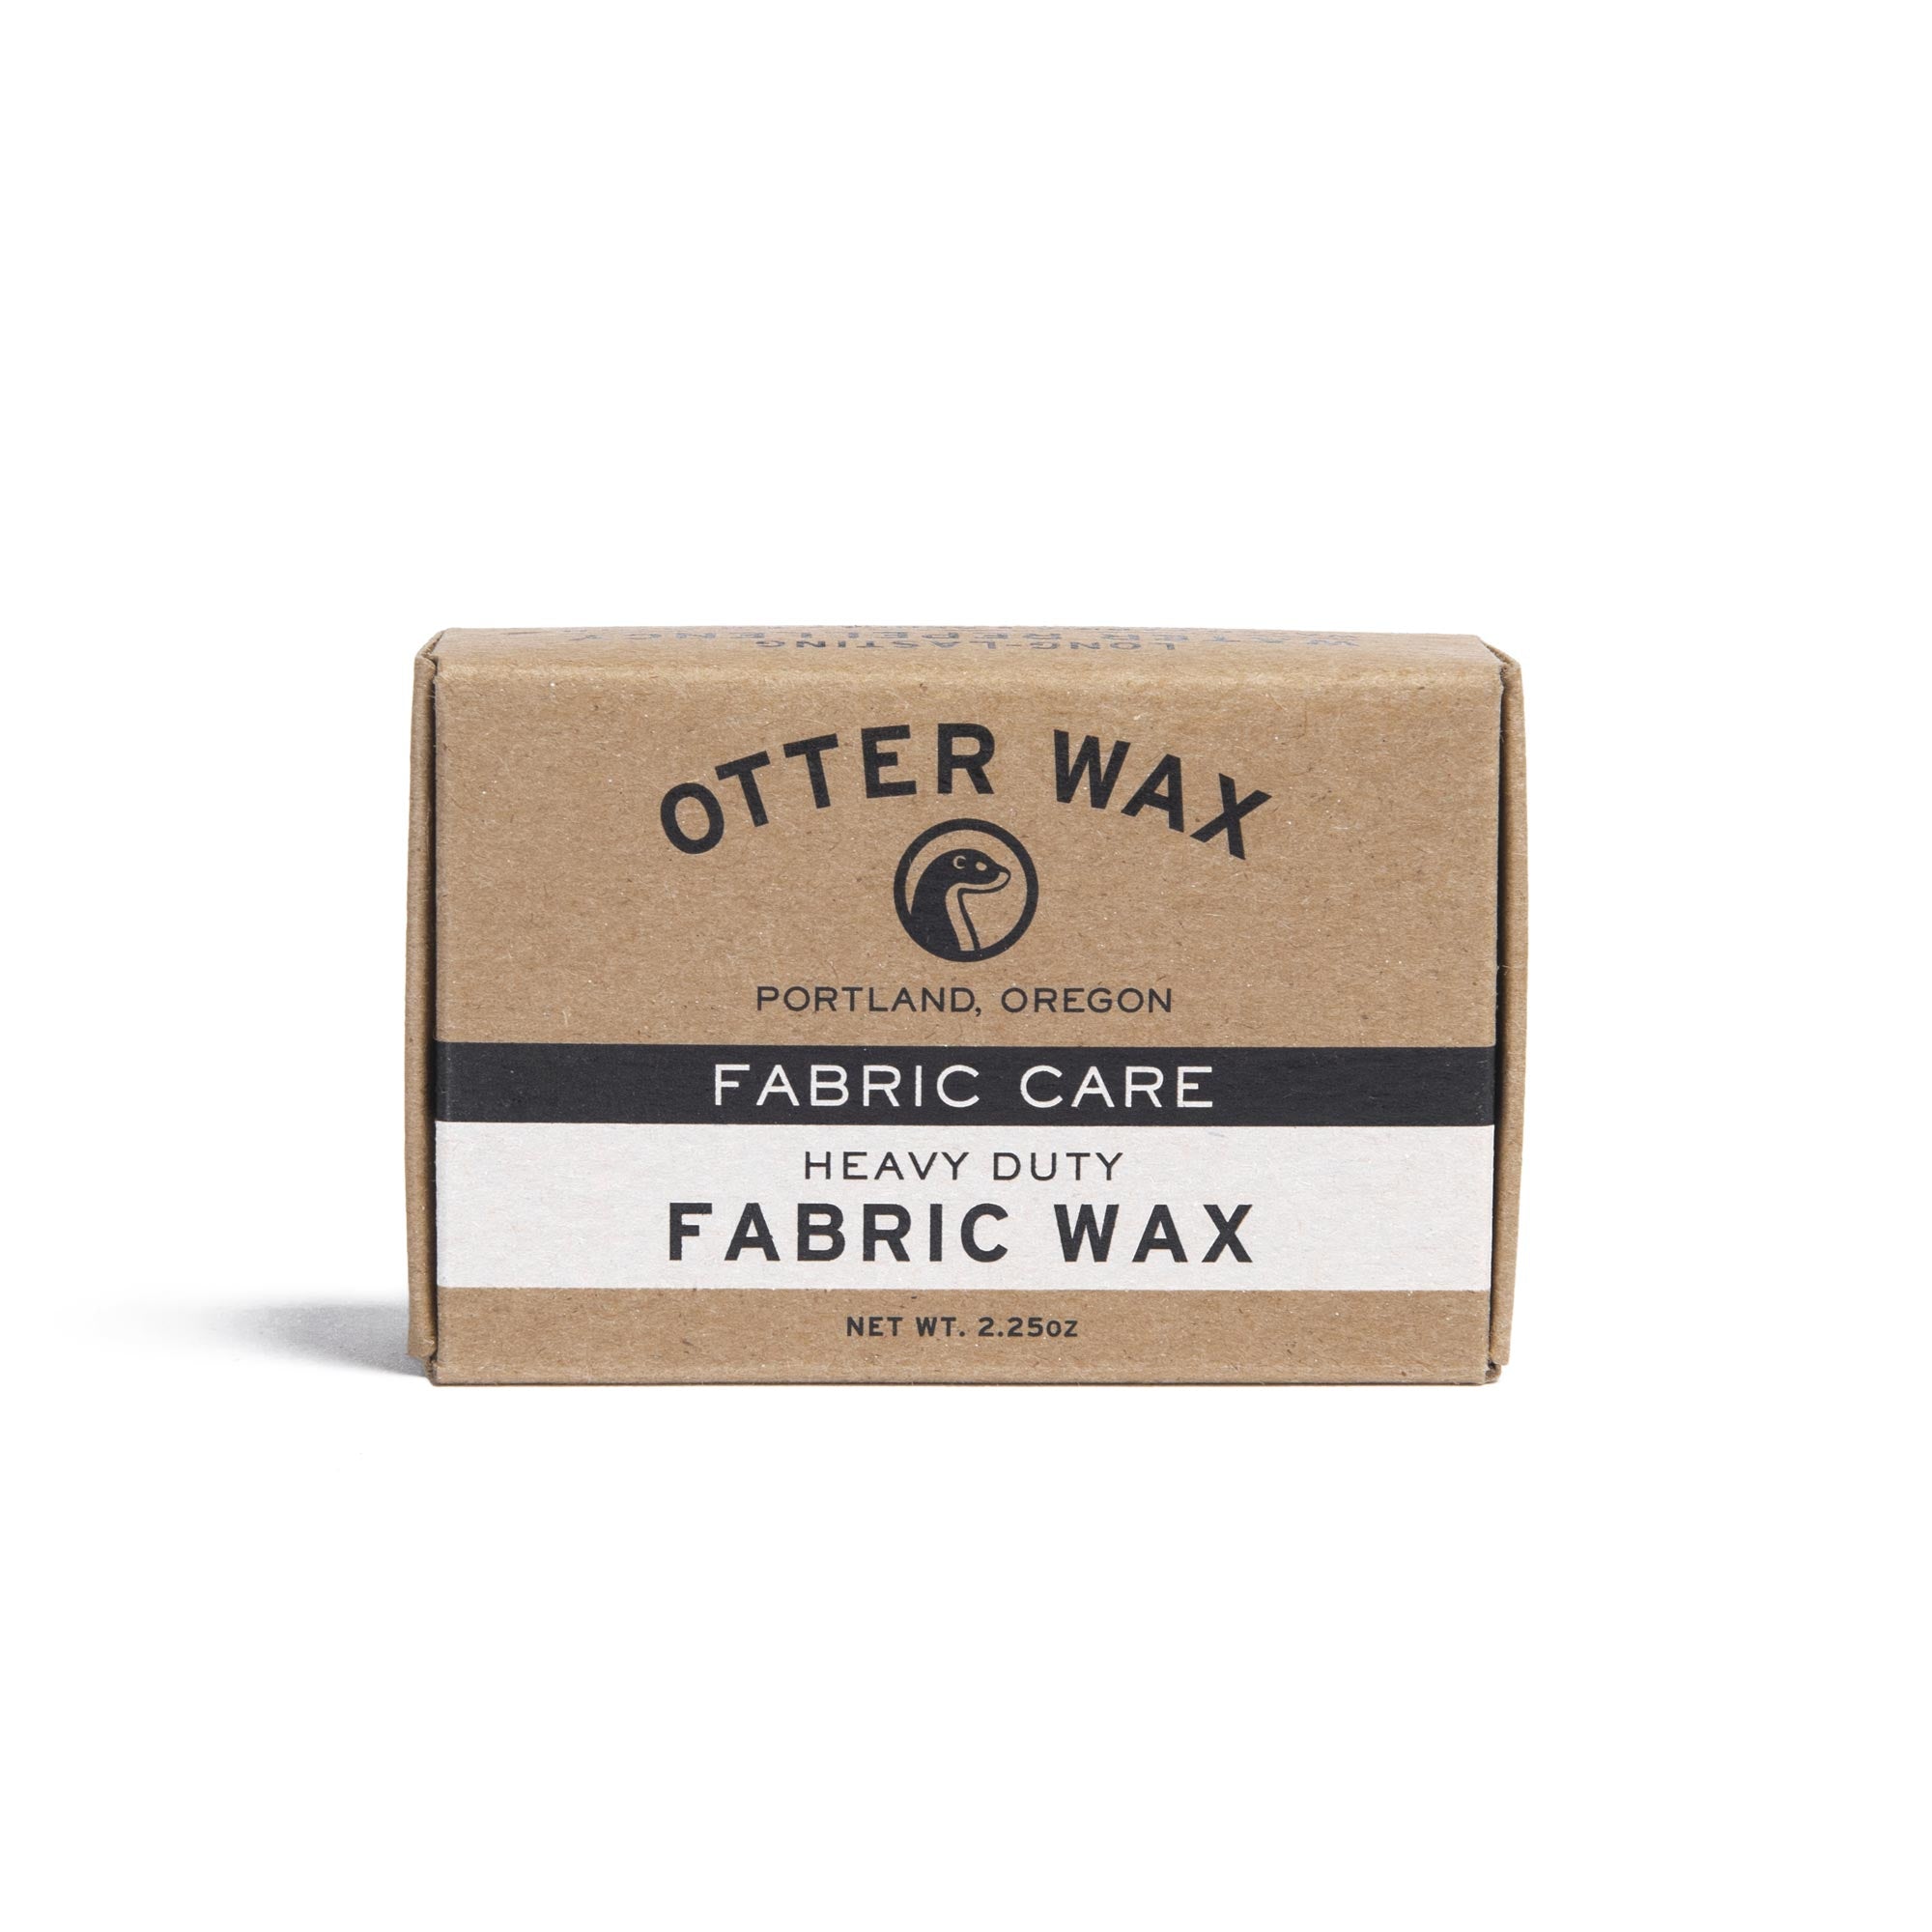 Otter Wax Heavy Duty Fabric Wax Regular 2.25oz Bar Best Natural And Handmade Wax To Waterproof And Protect Canvas Tincloth And Oilcloith Fabric